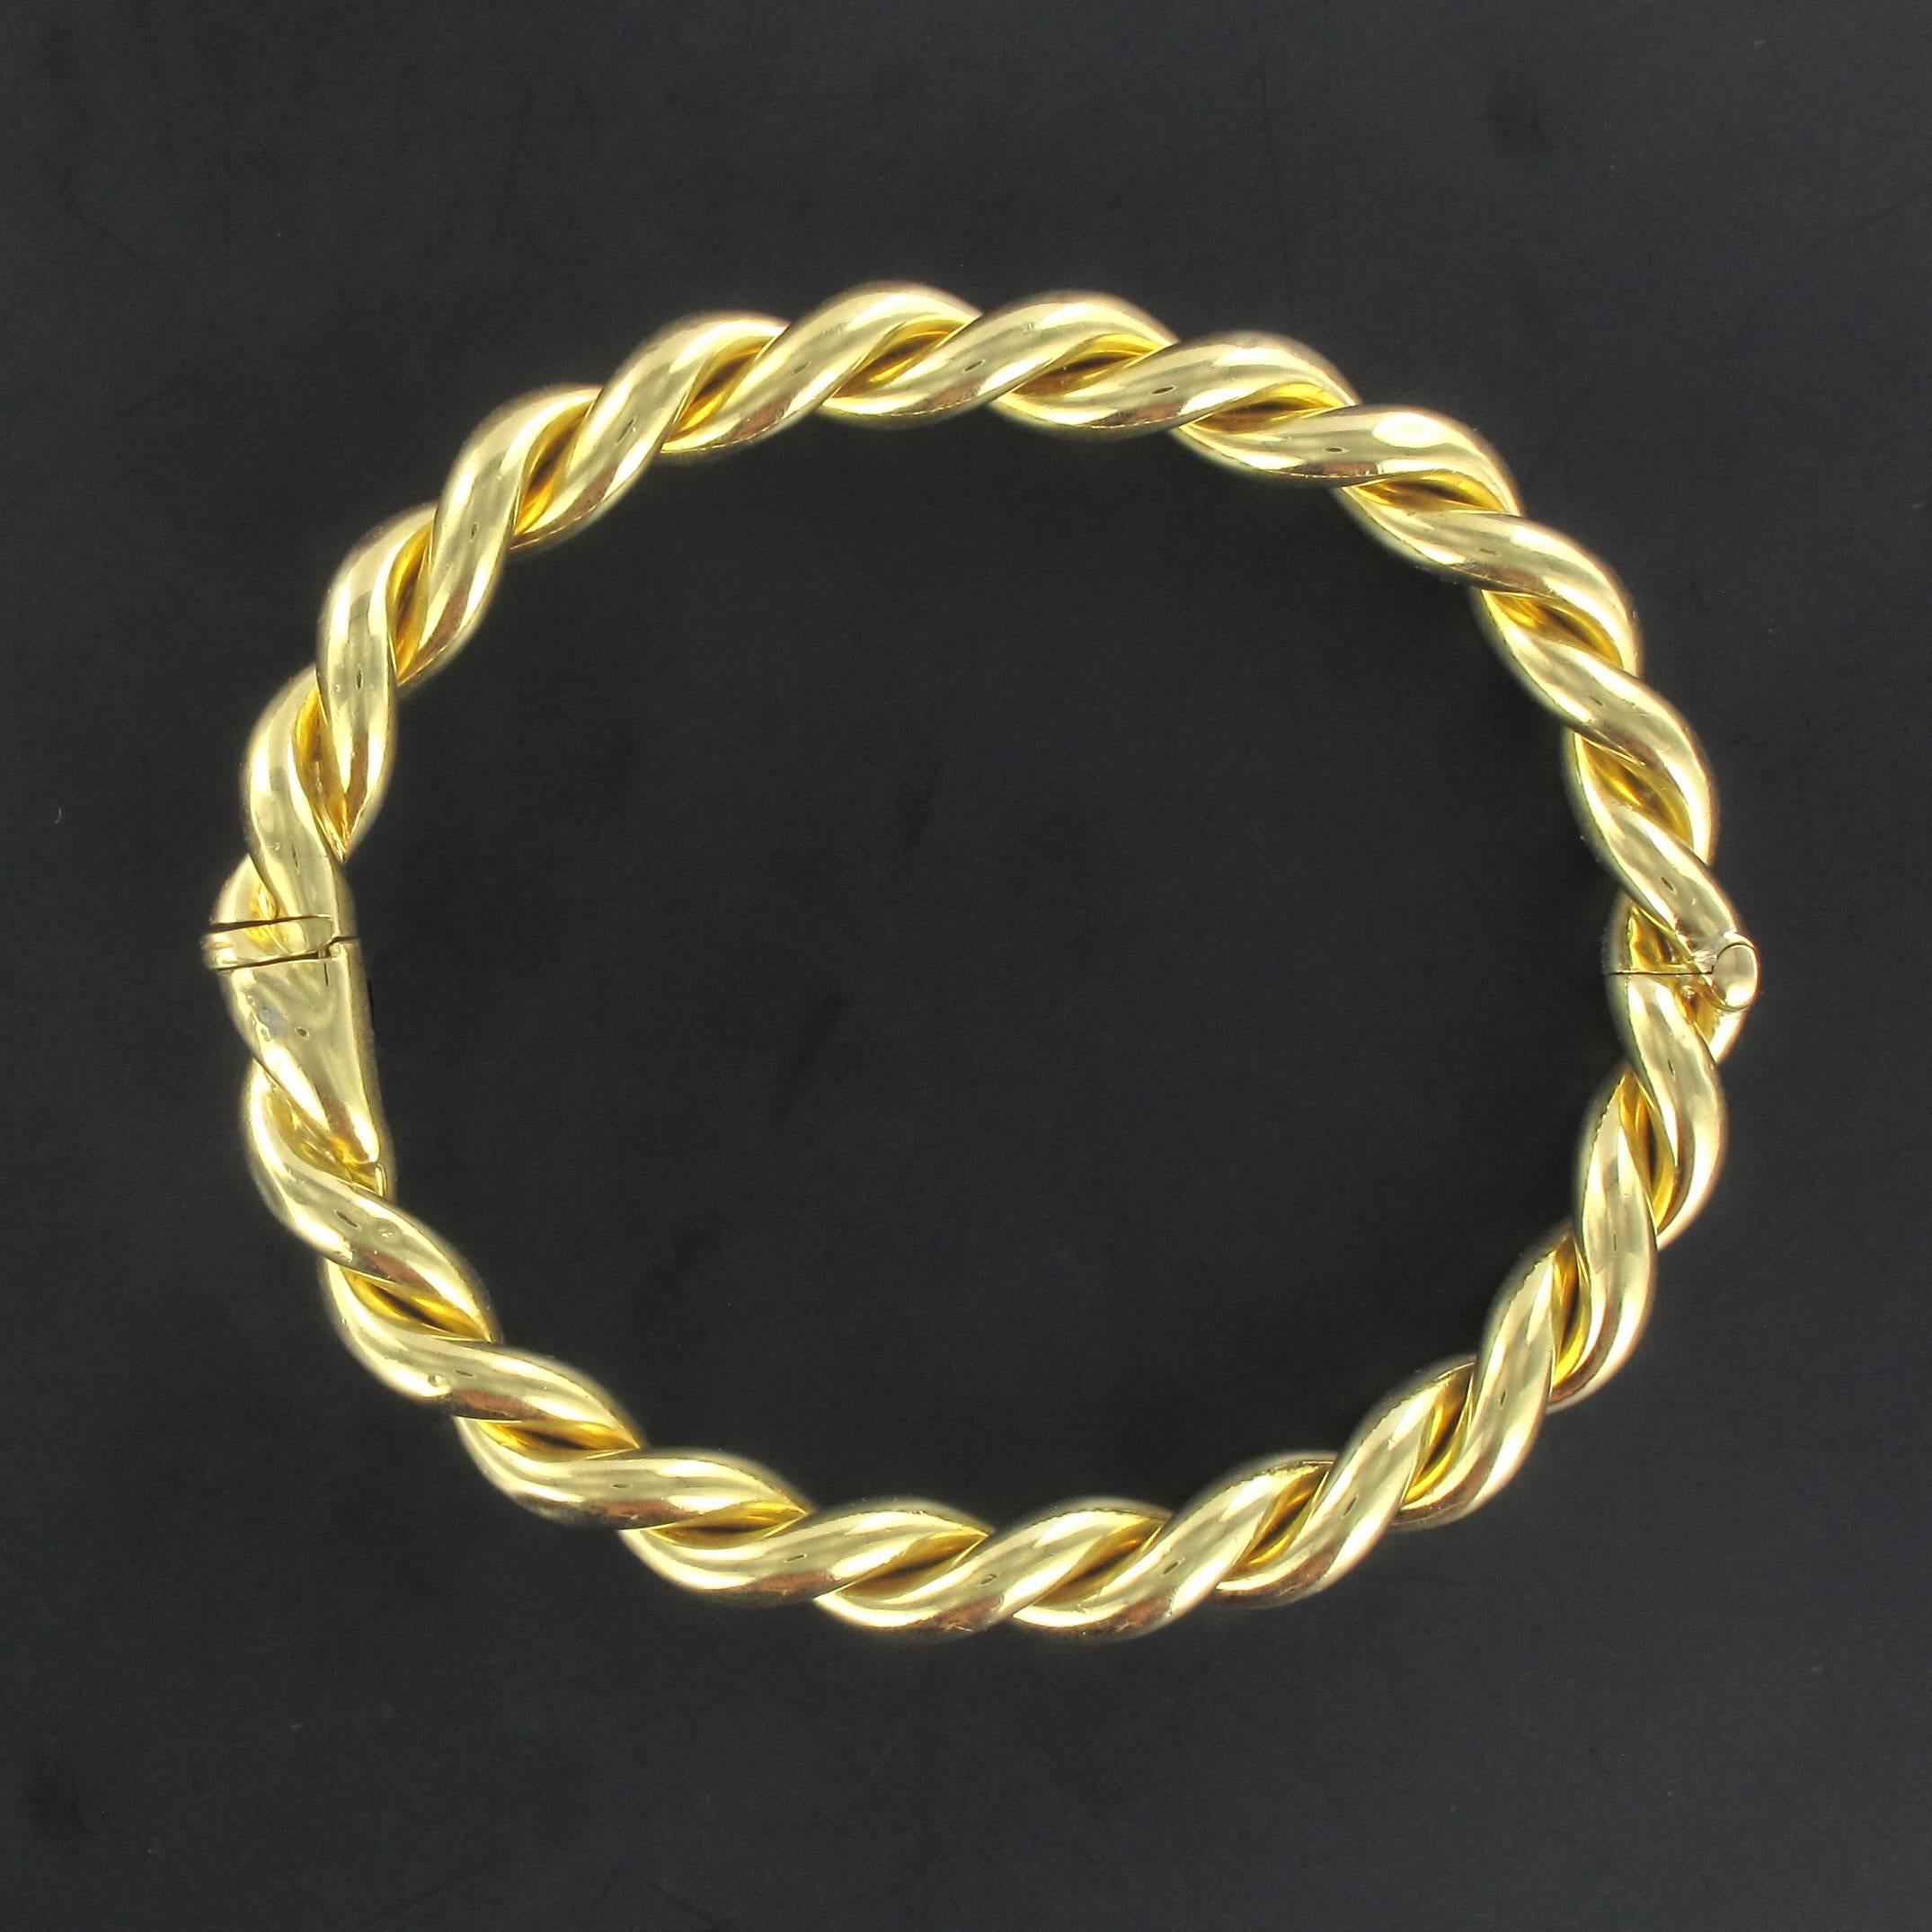 Bracelet in 18 carat yellow gold. 

This stunning antique round bangle bracelet is composed of twisted gold. The clasp is in the form of a hinge with a safety clip. 

Interior dimensions: 6.5 cm x 5.6 cm, width 7.4 mm. 
Circumference: 24.8